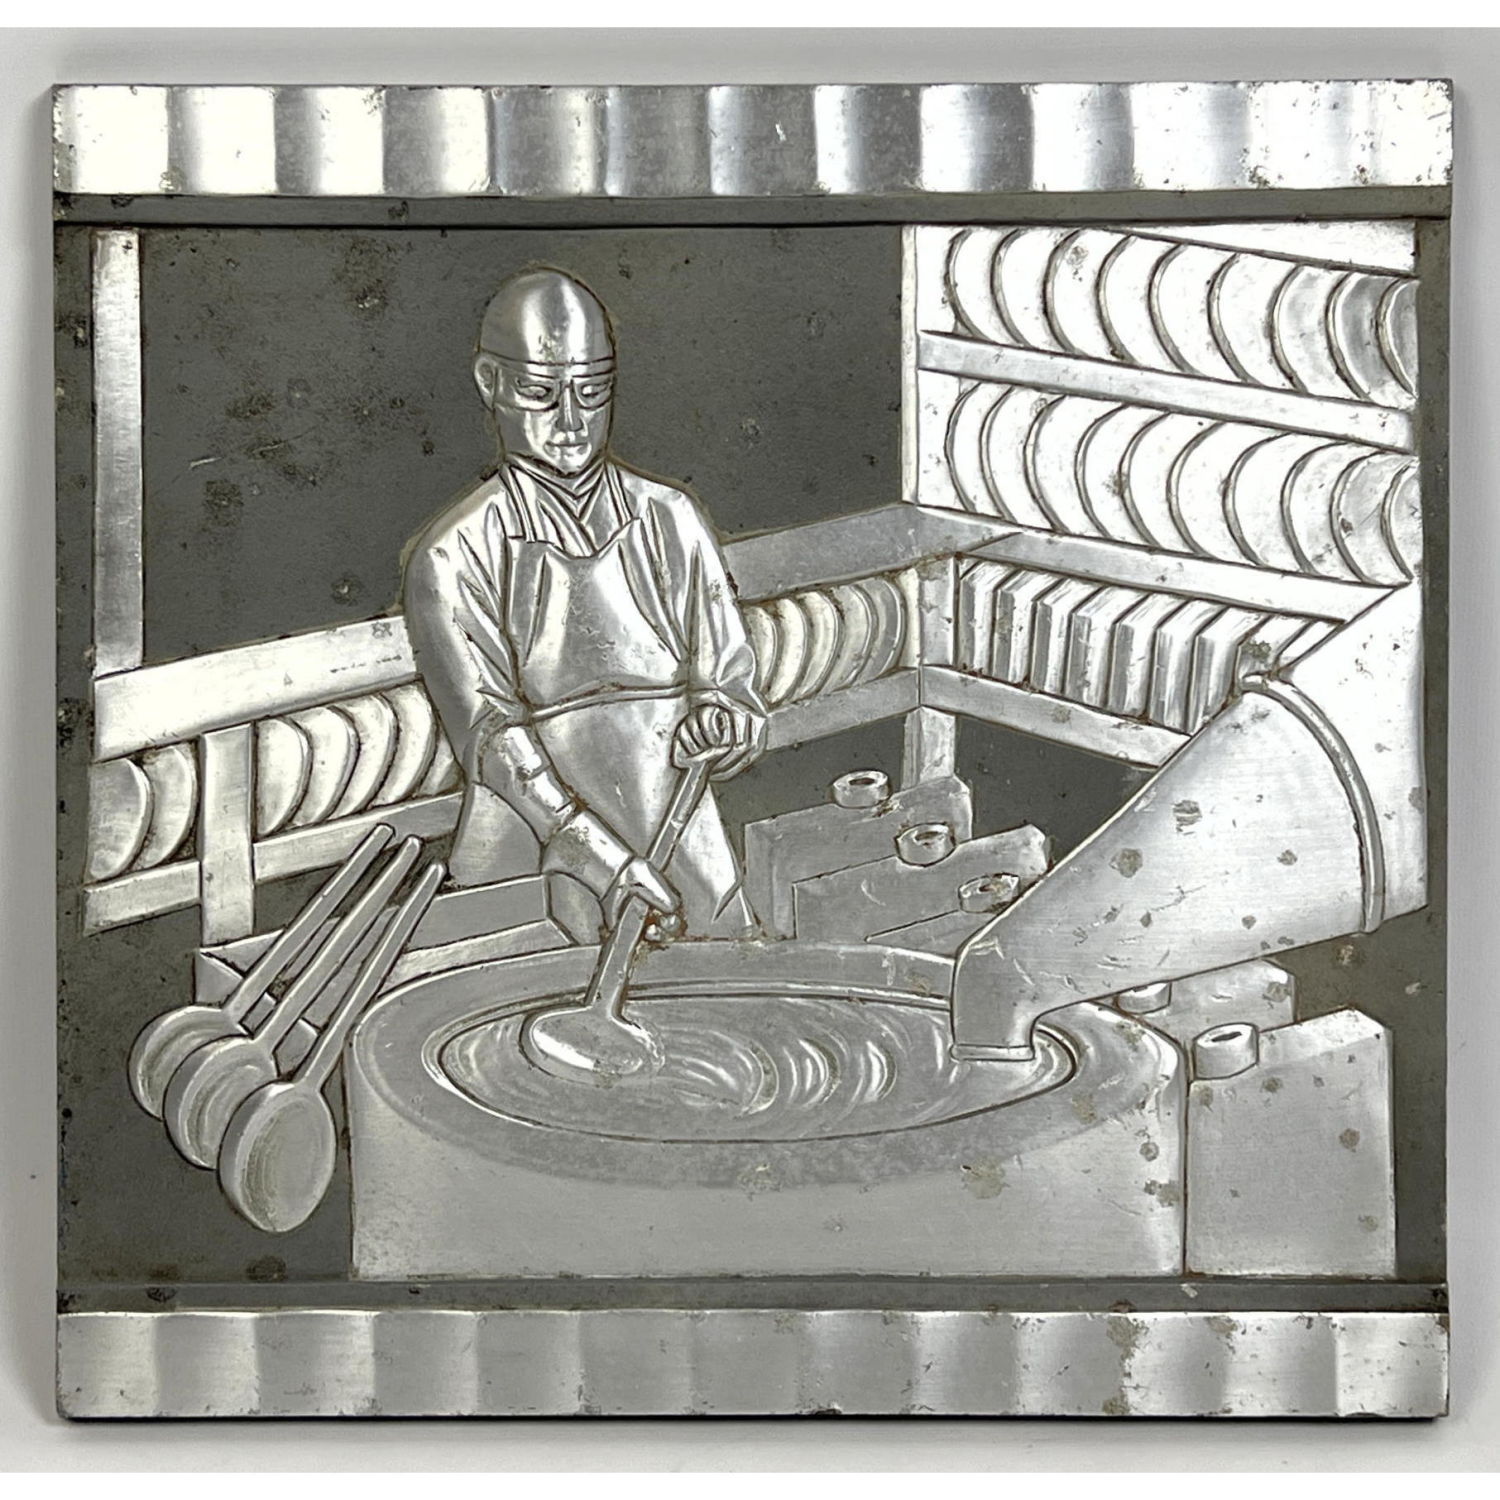 Molded Metal Relief Plaque of Occupational 2bac00